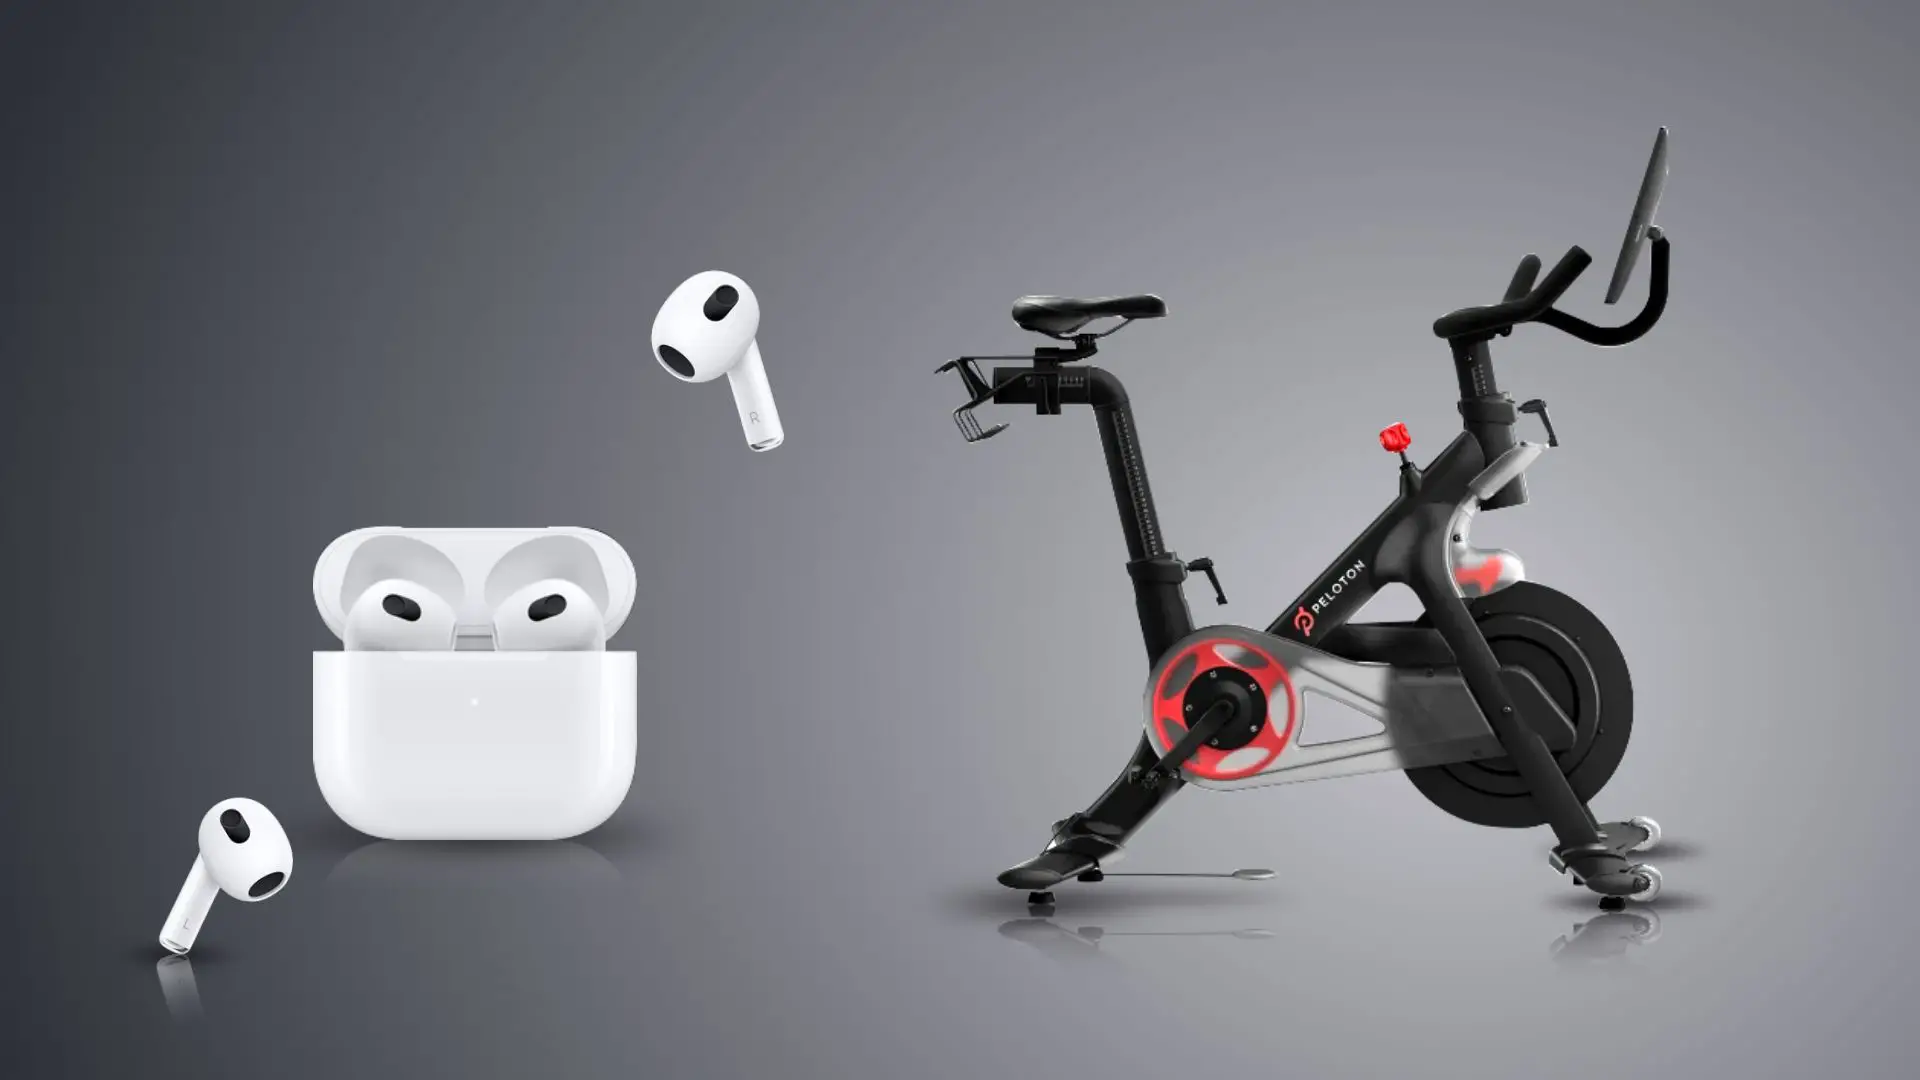 How to Connect AirPods to Peloton